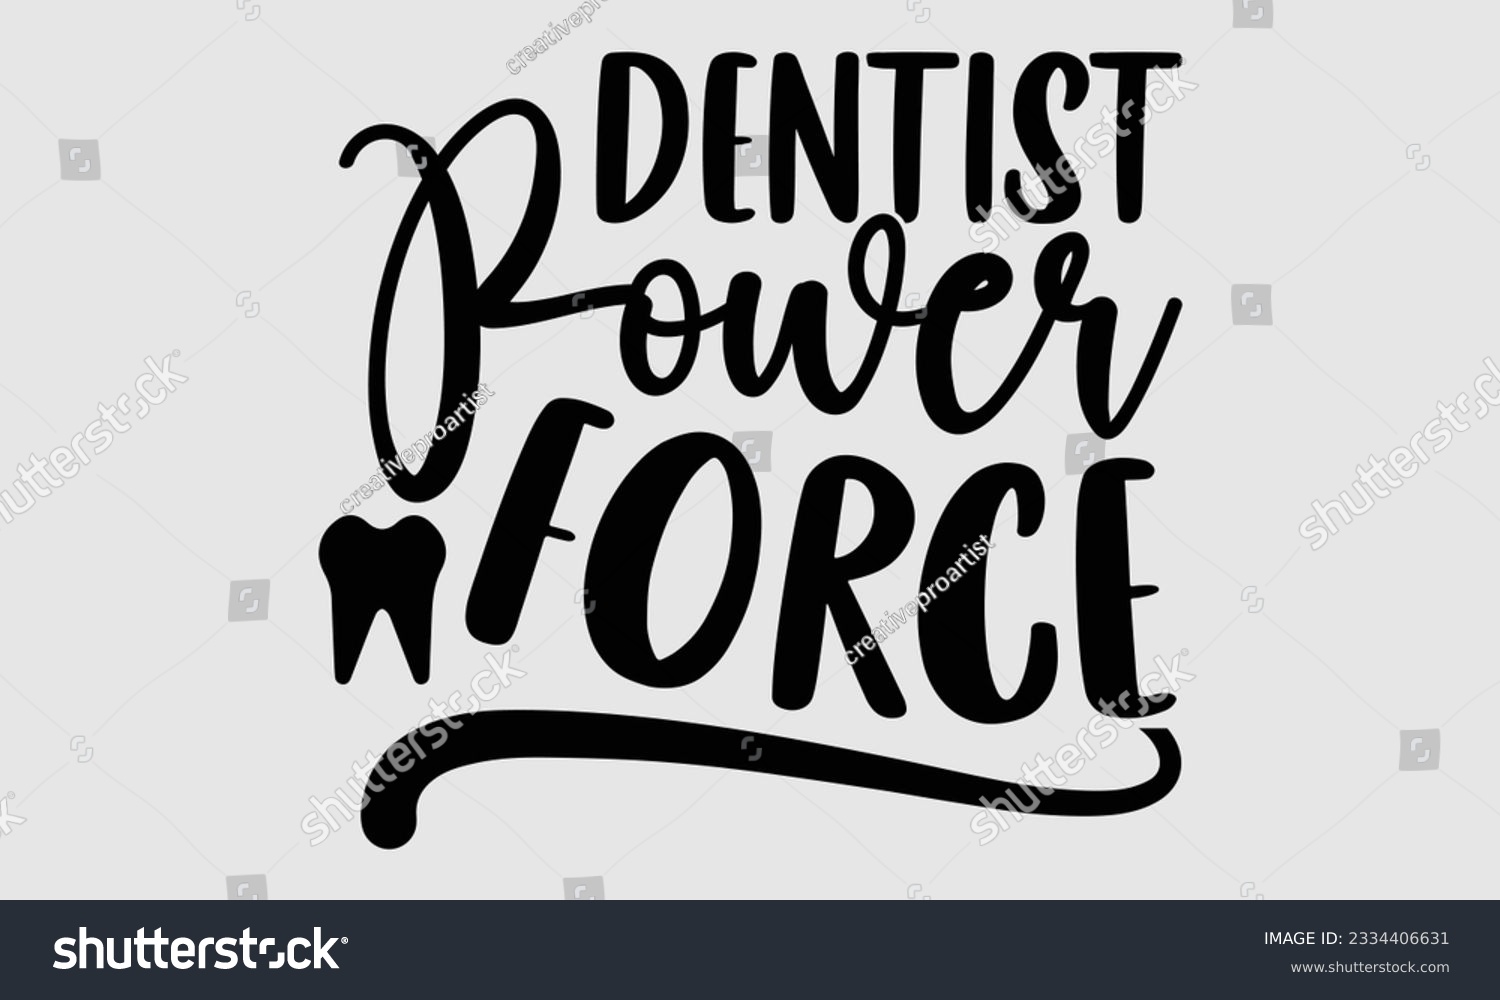 SVG of Dentist Power Force- Dentist t-shirt design, Hand drawn lettering phrase isolated on white background, Illustration  SVG template for prints and bags, posters, cards, EPS svg